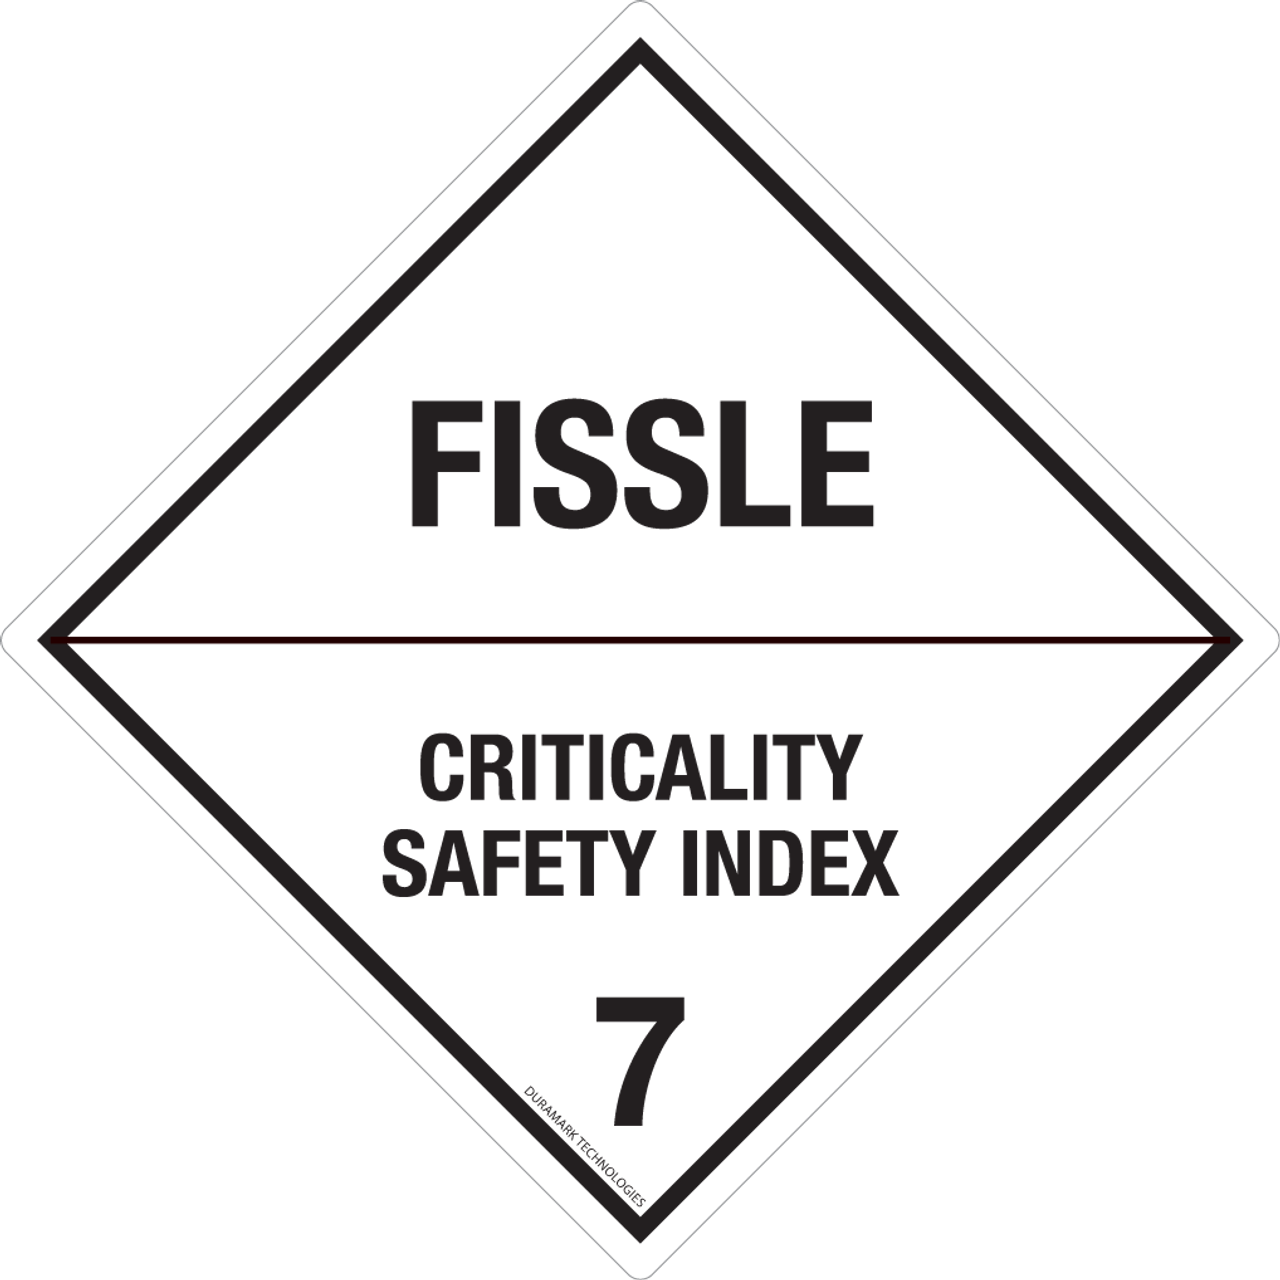 DOT Fissile Criticality Safety Index